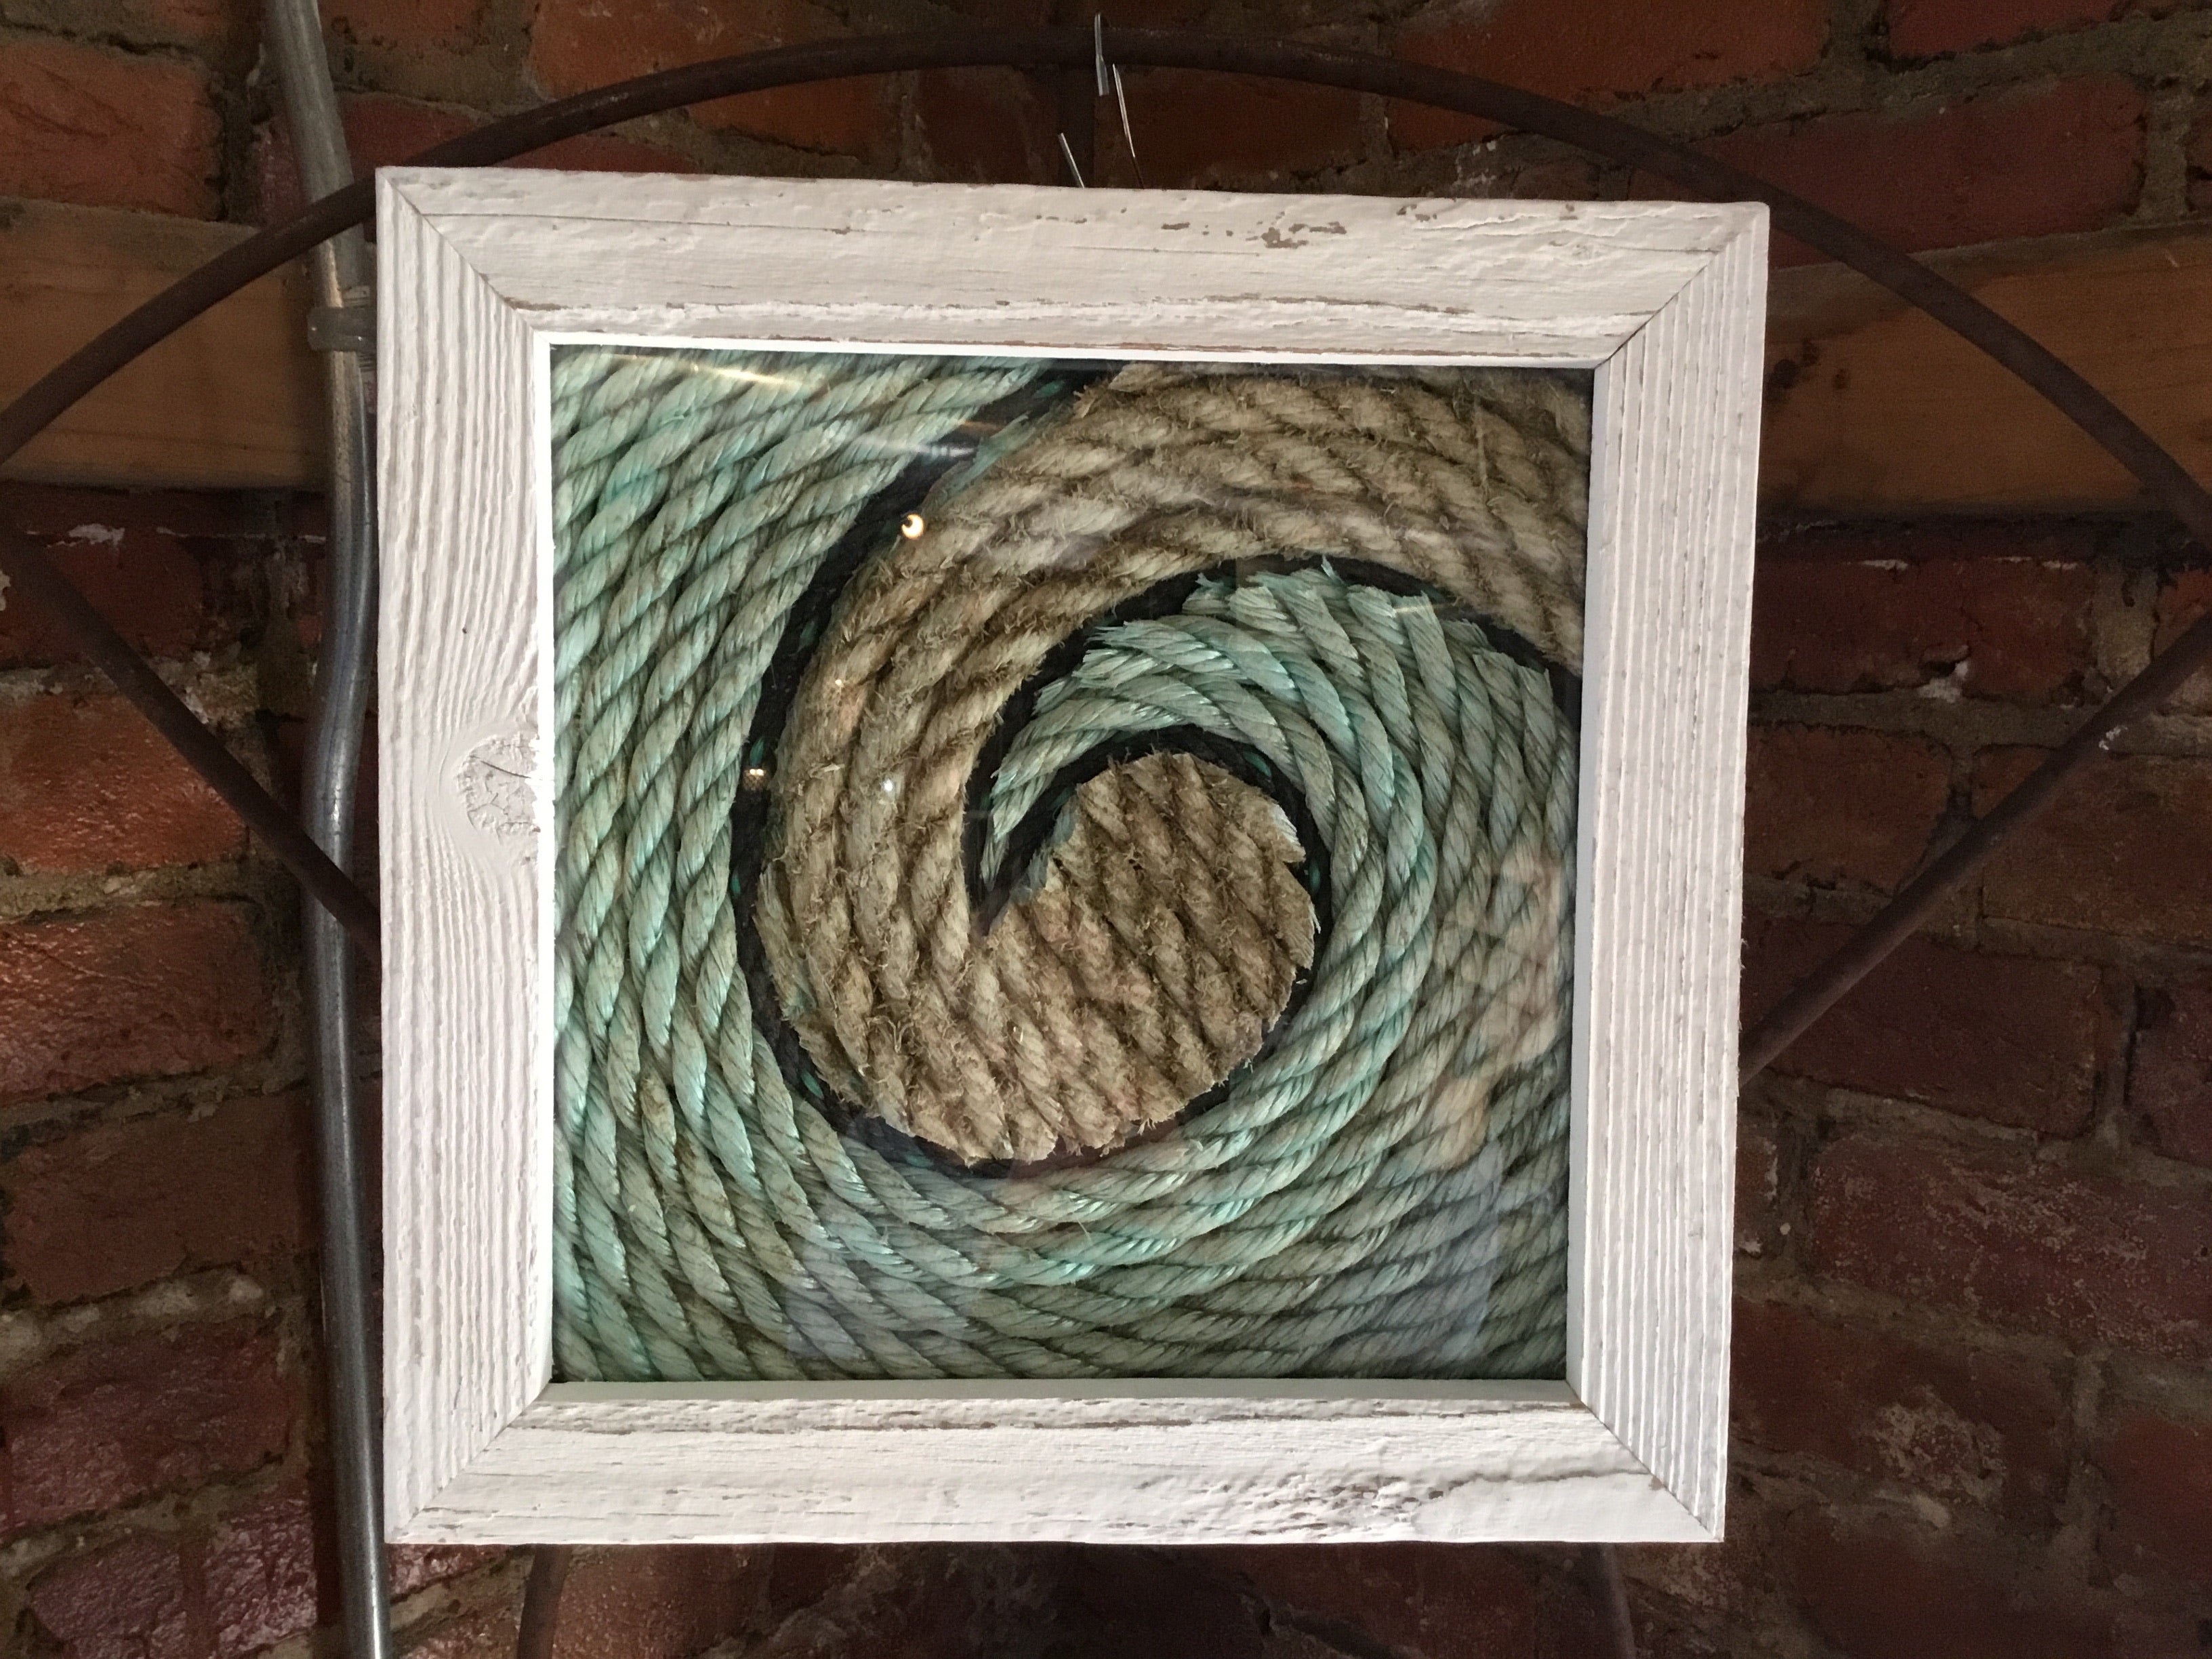 Harborside Upcycled - Recycled Rope Art #5